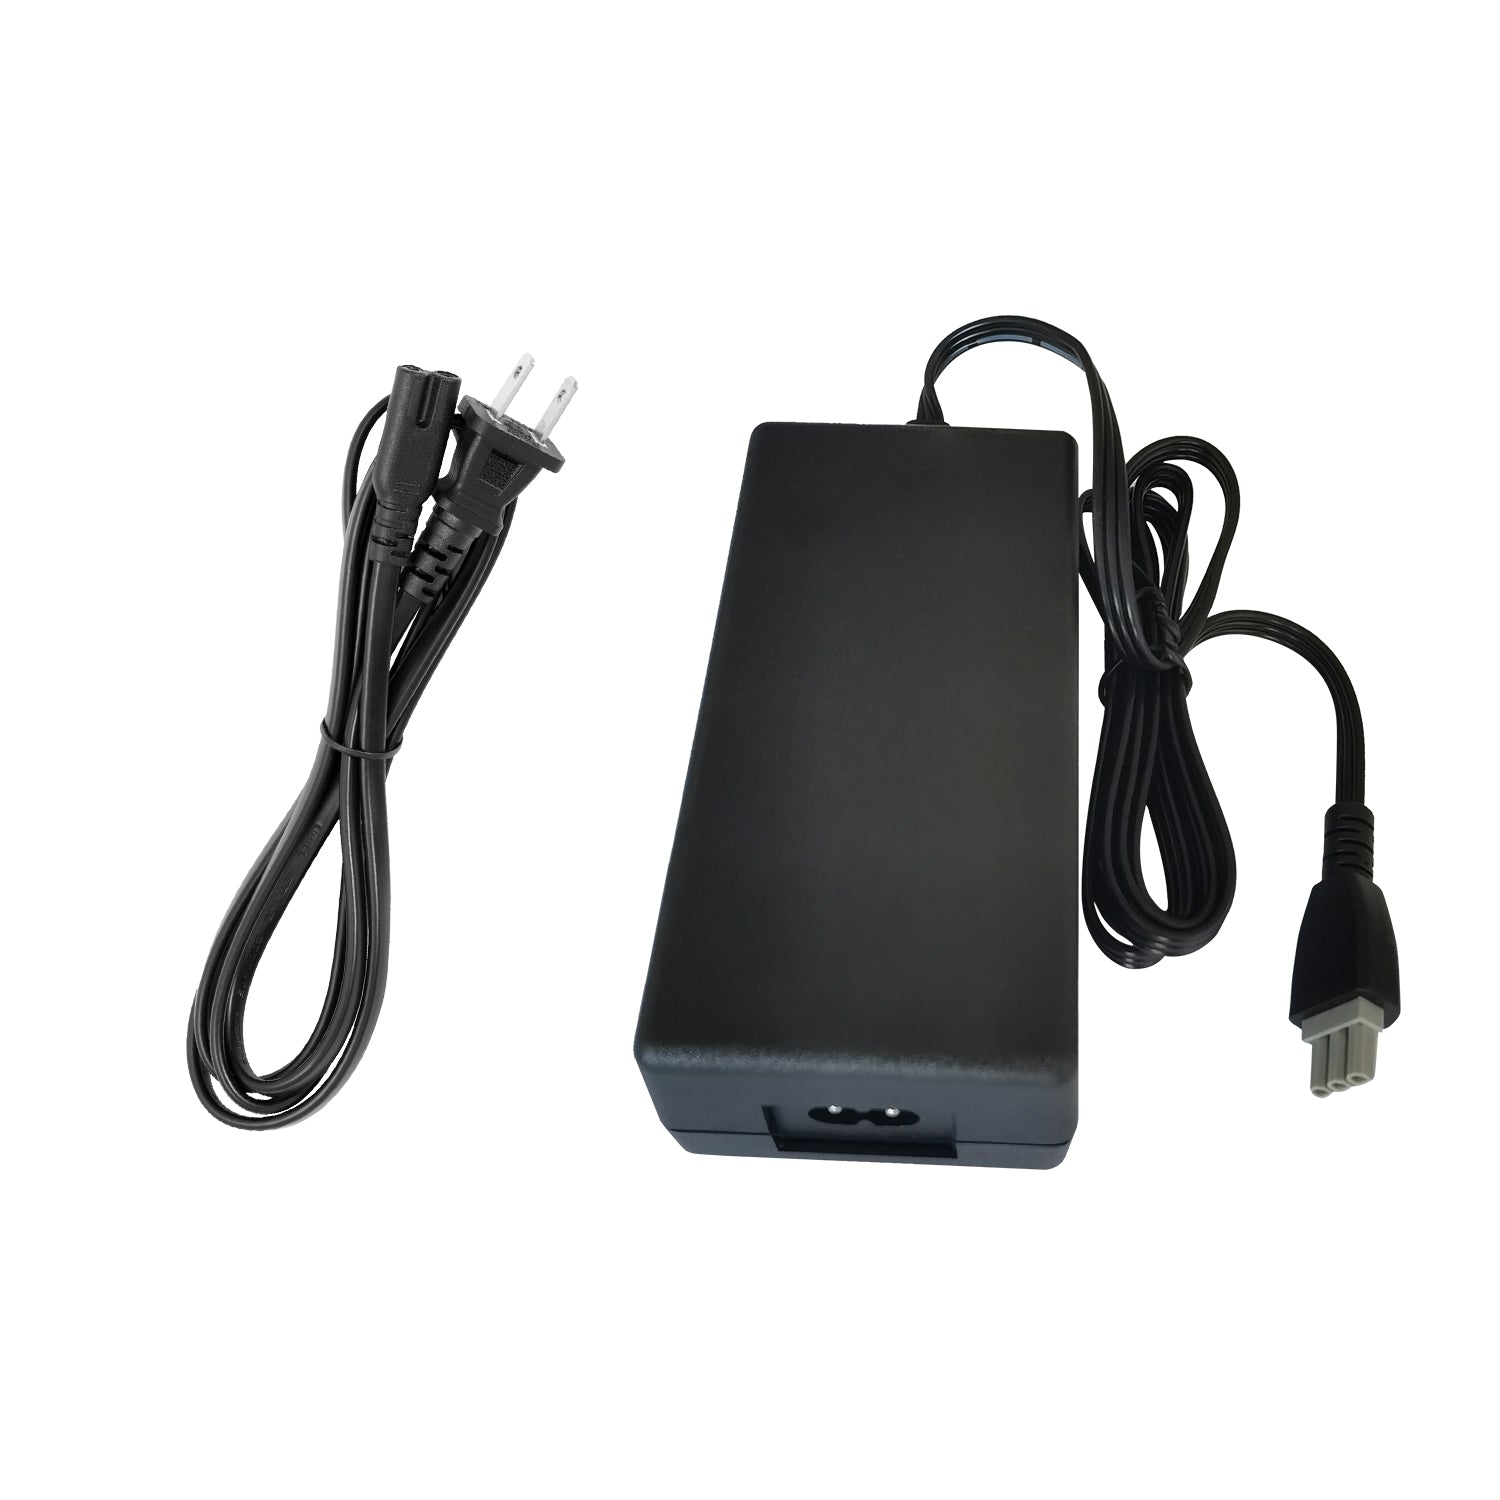 Power Adapter for HP PSC 1315 All-in-One Printer.